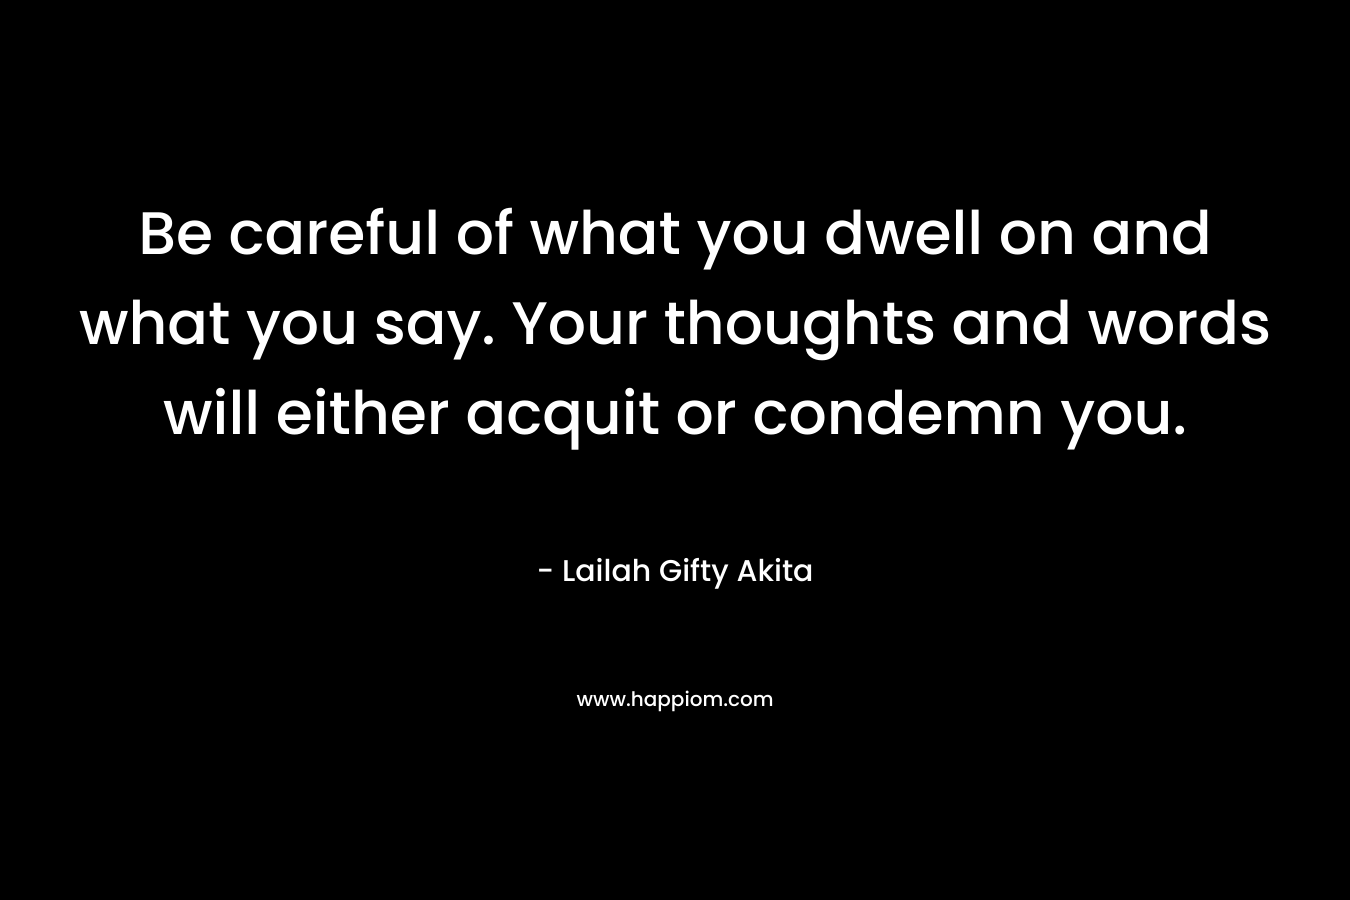 Be careful of what you dwell on and what you say. Your thoughts and words will either acquit or condemn you. – Lailah Gifty Akita